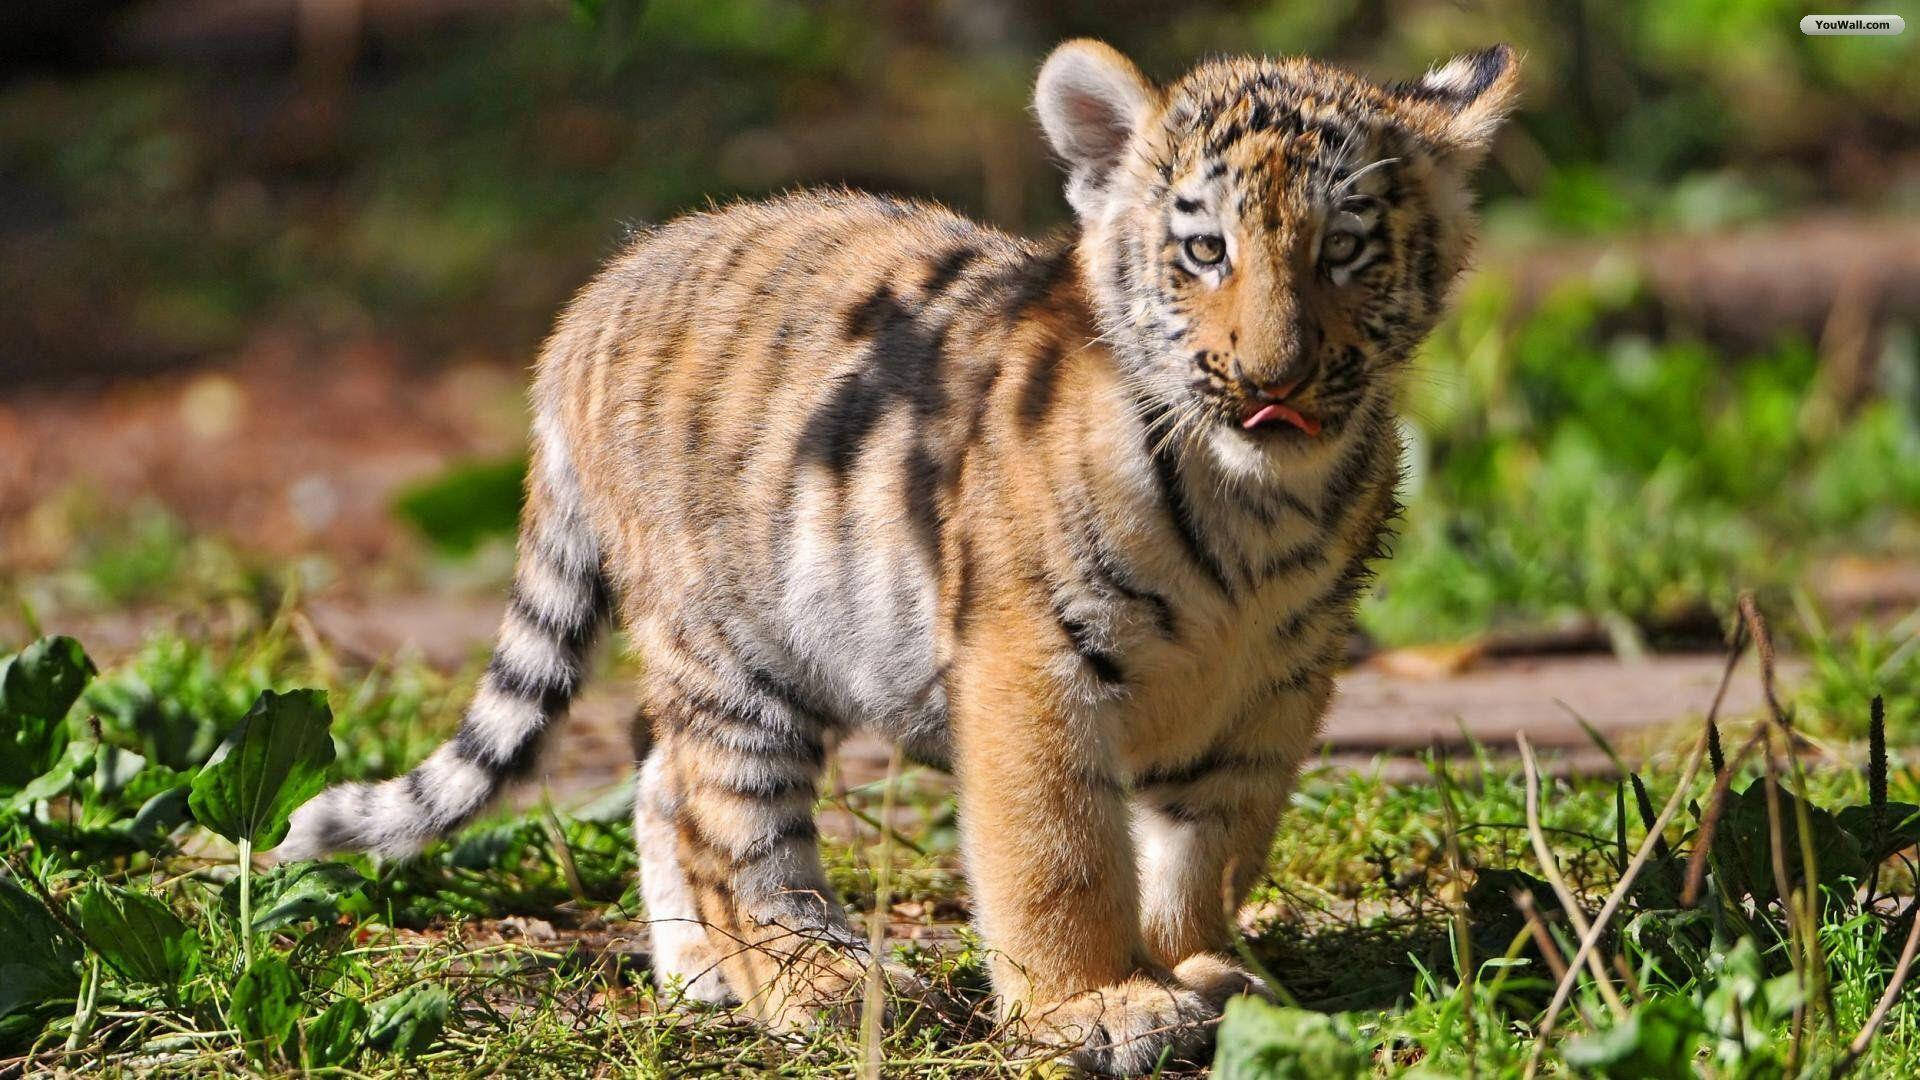 Baby Tiger In Forest